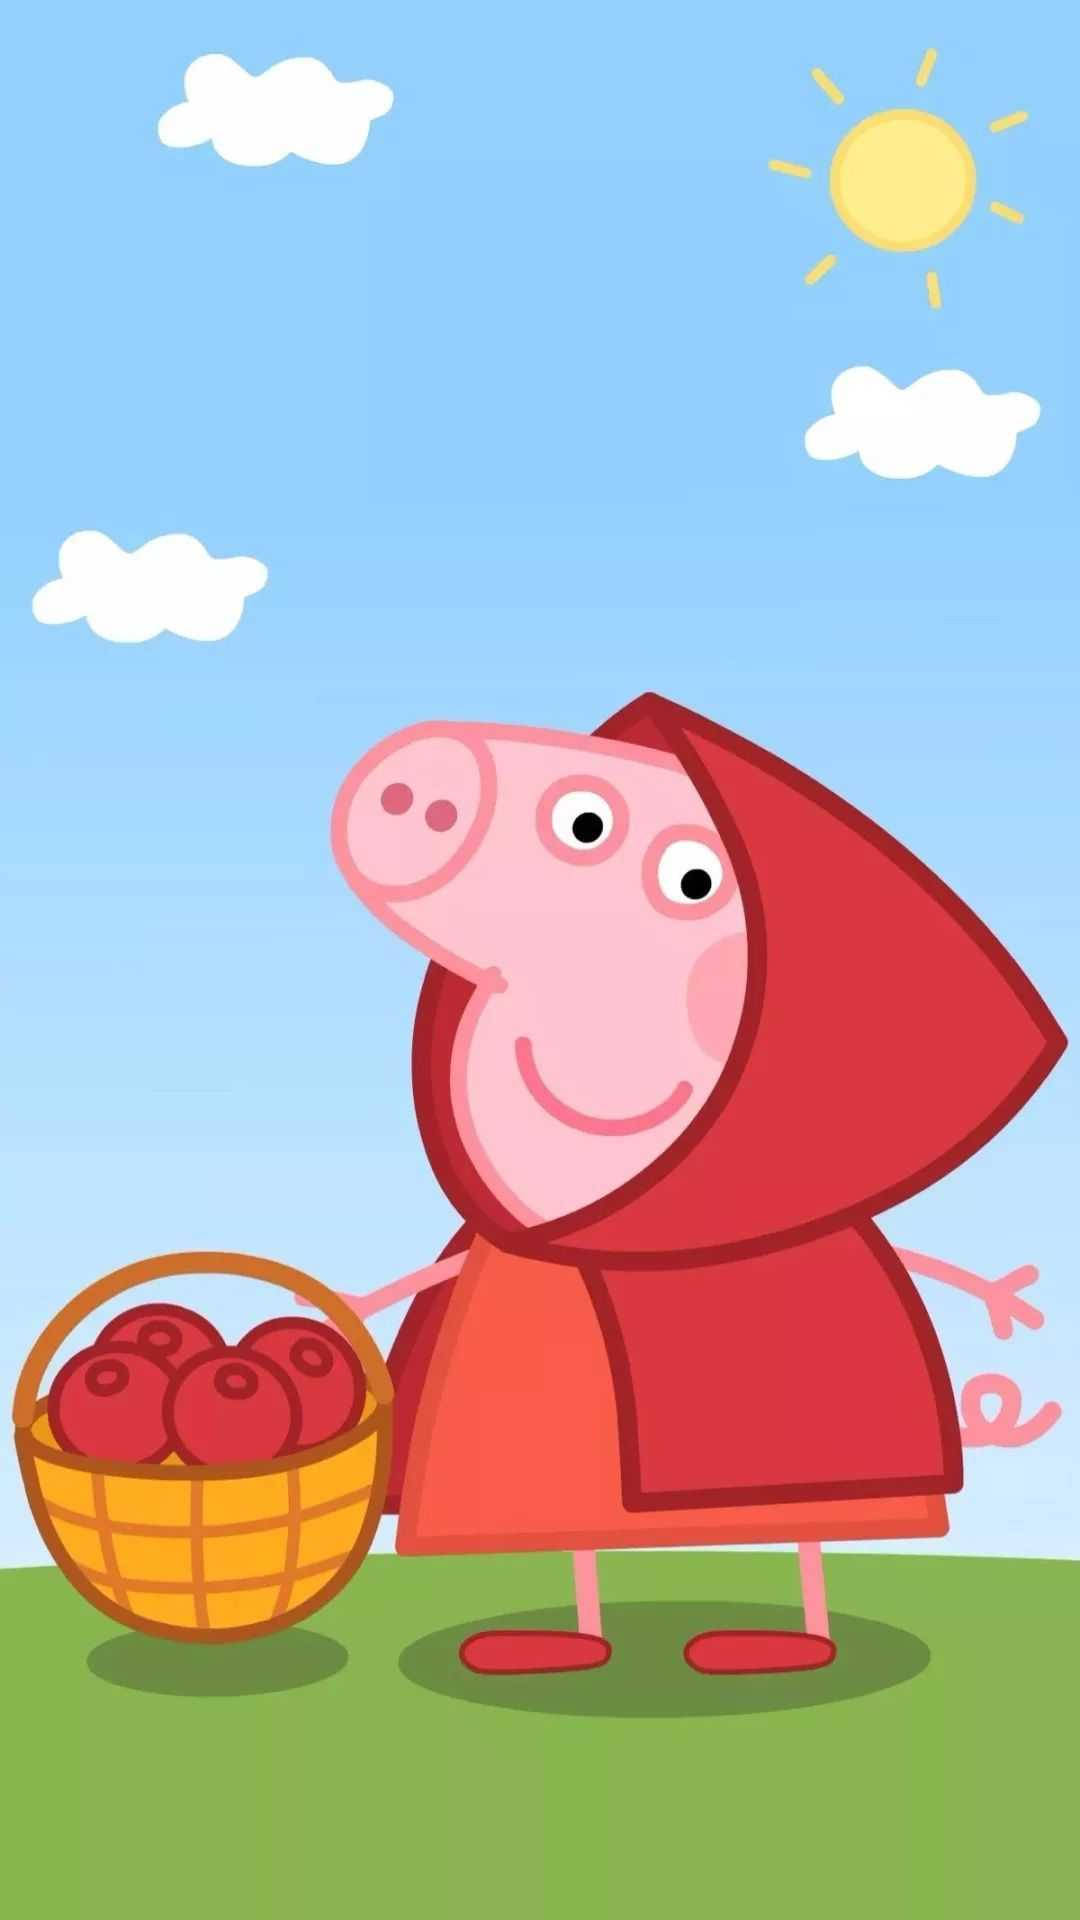 Red Hooded Peppa Pig Iphone Background